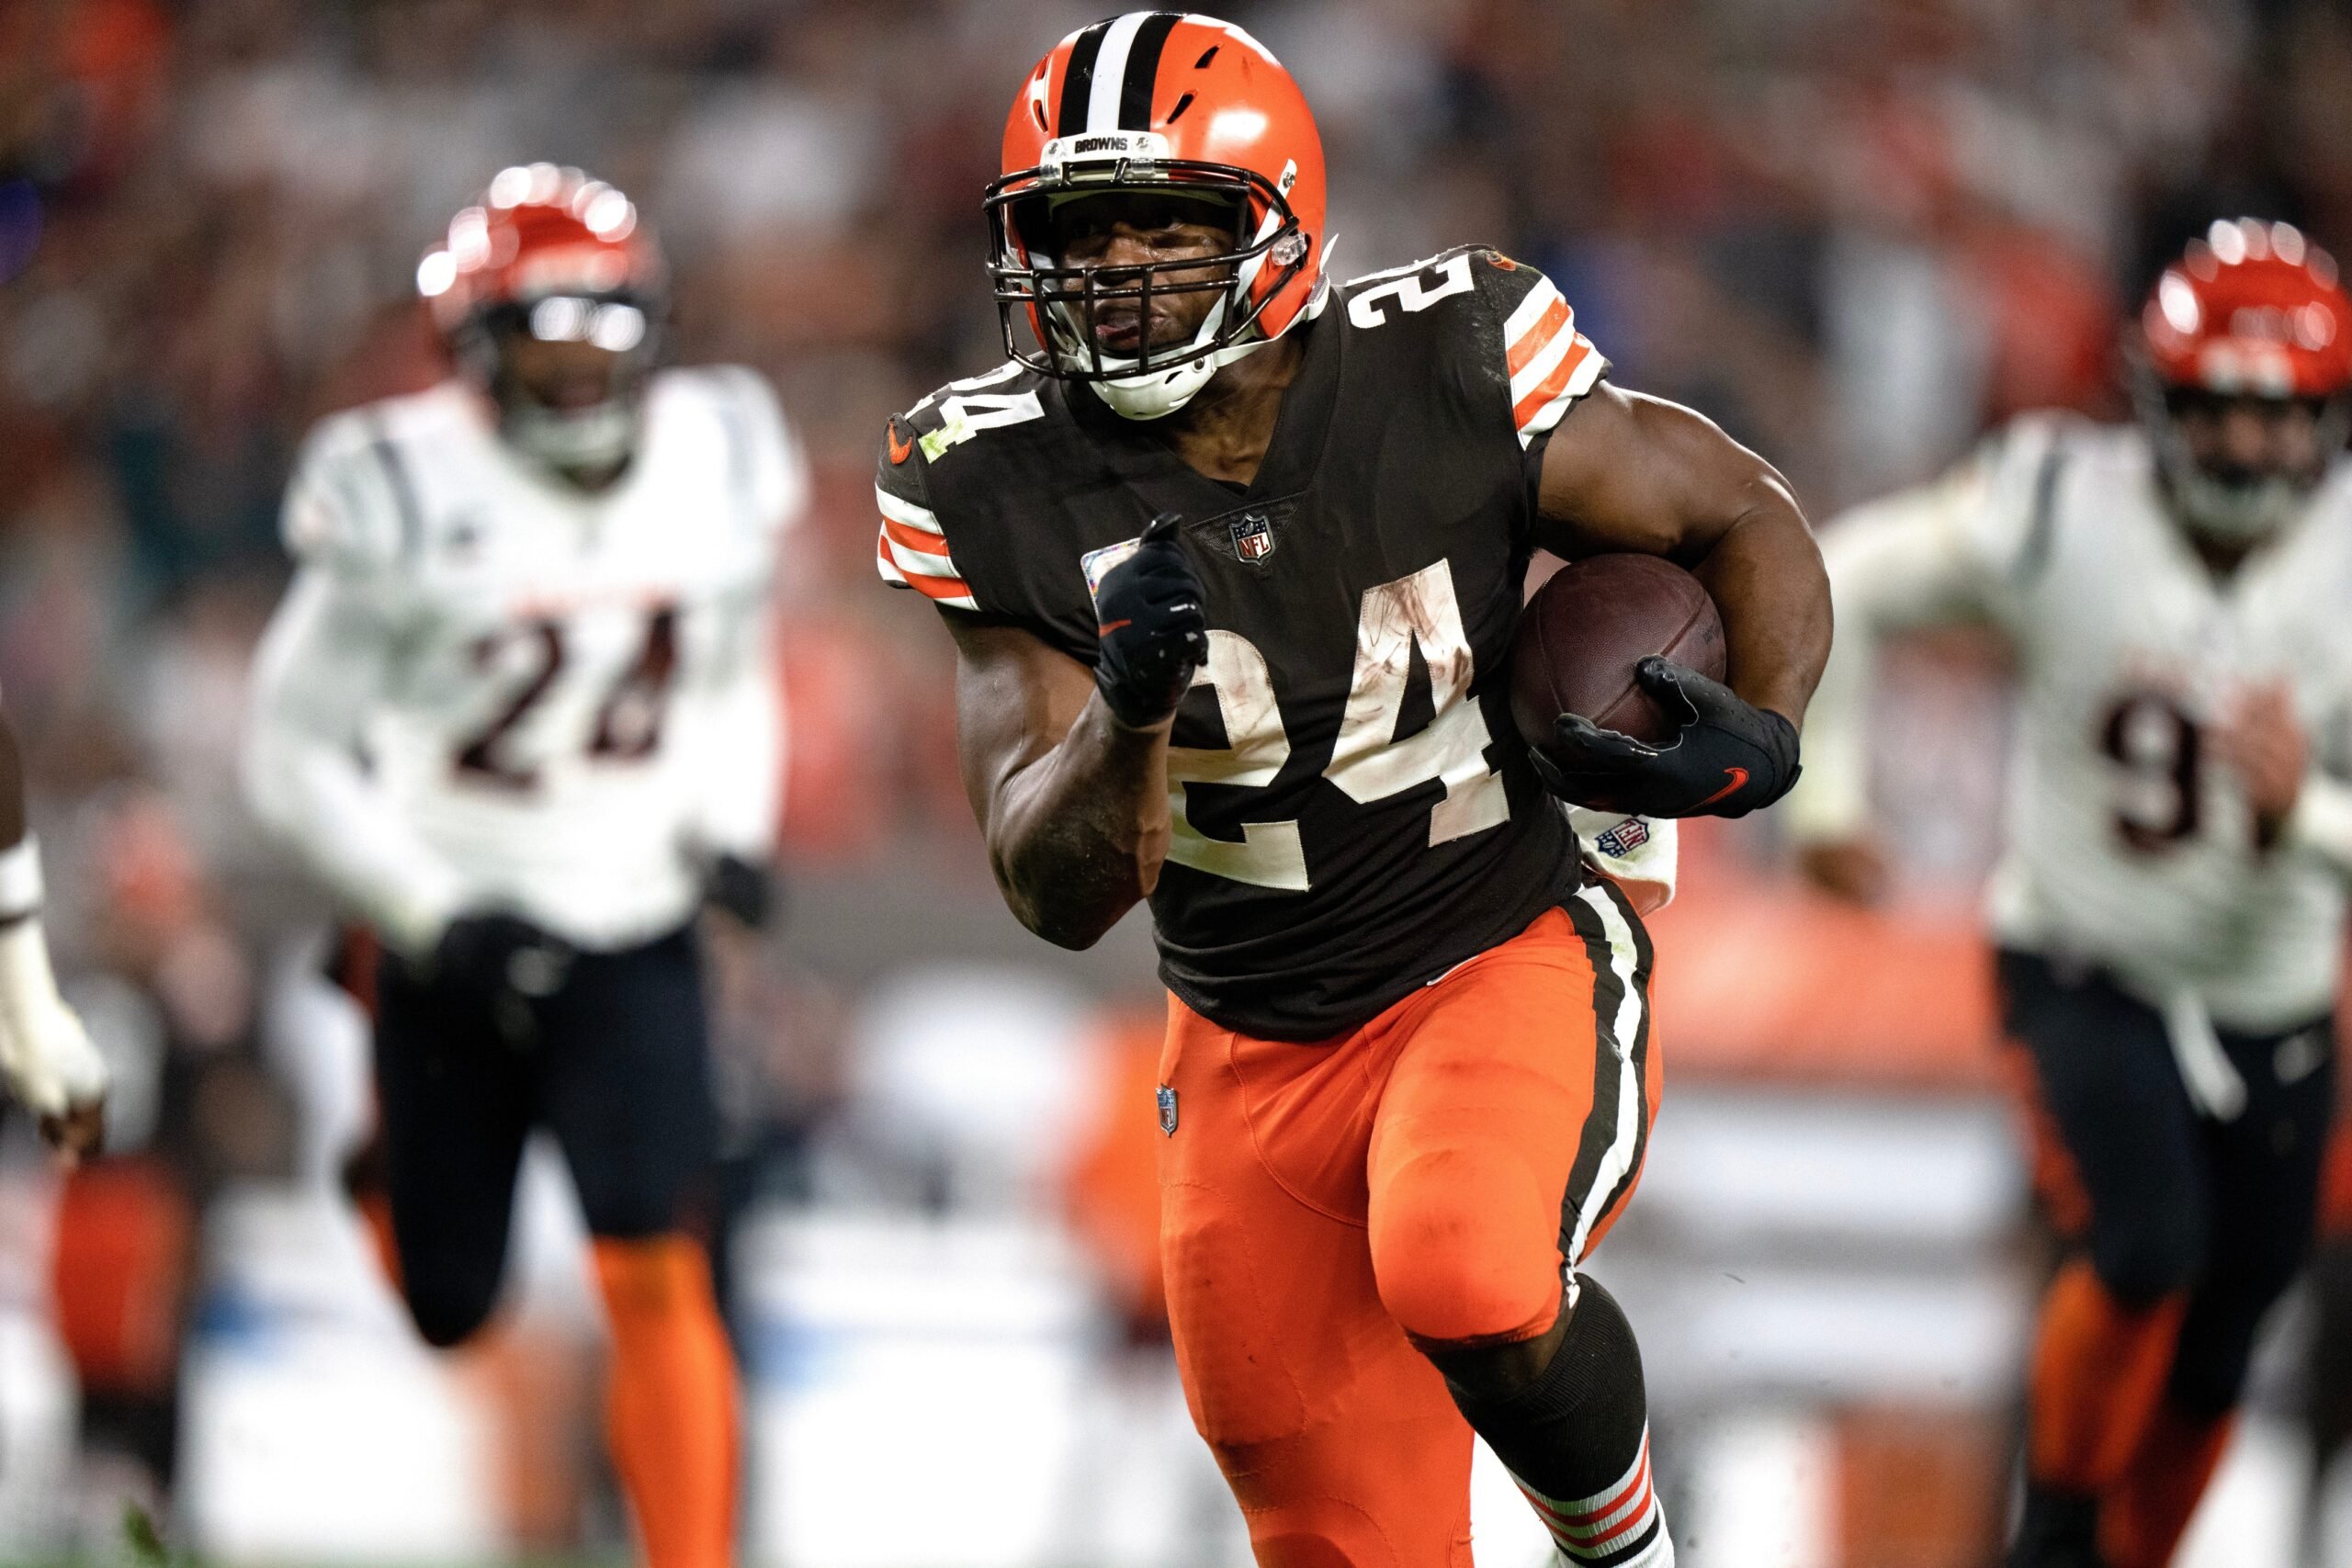 Fantasy Drafts: What is ADP in Fantasy Football? - Bleacher Nation